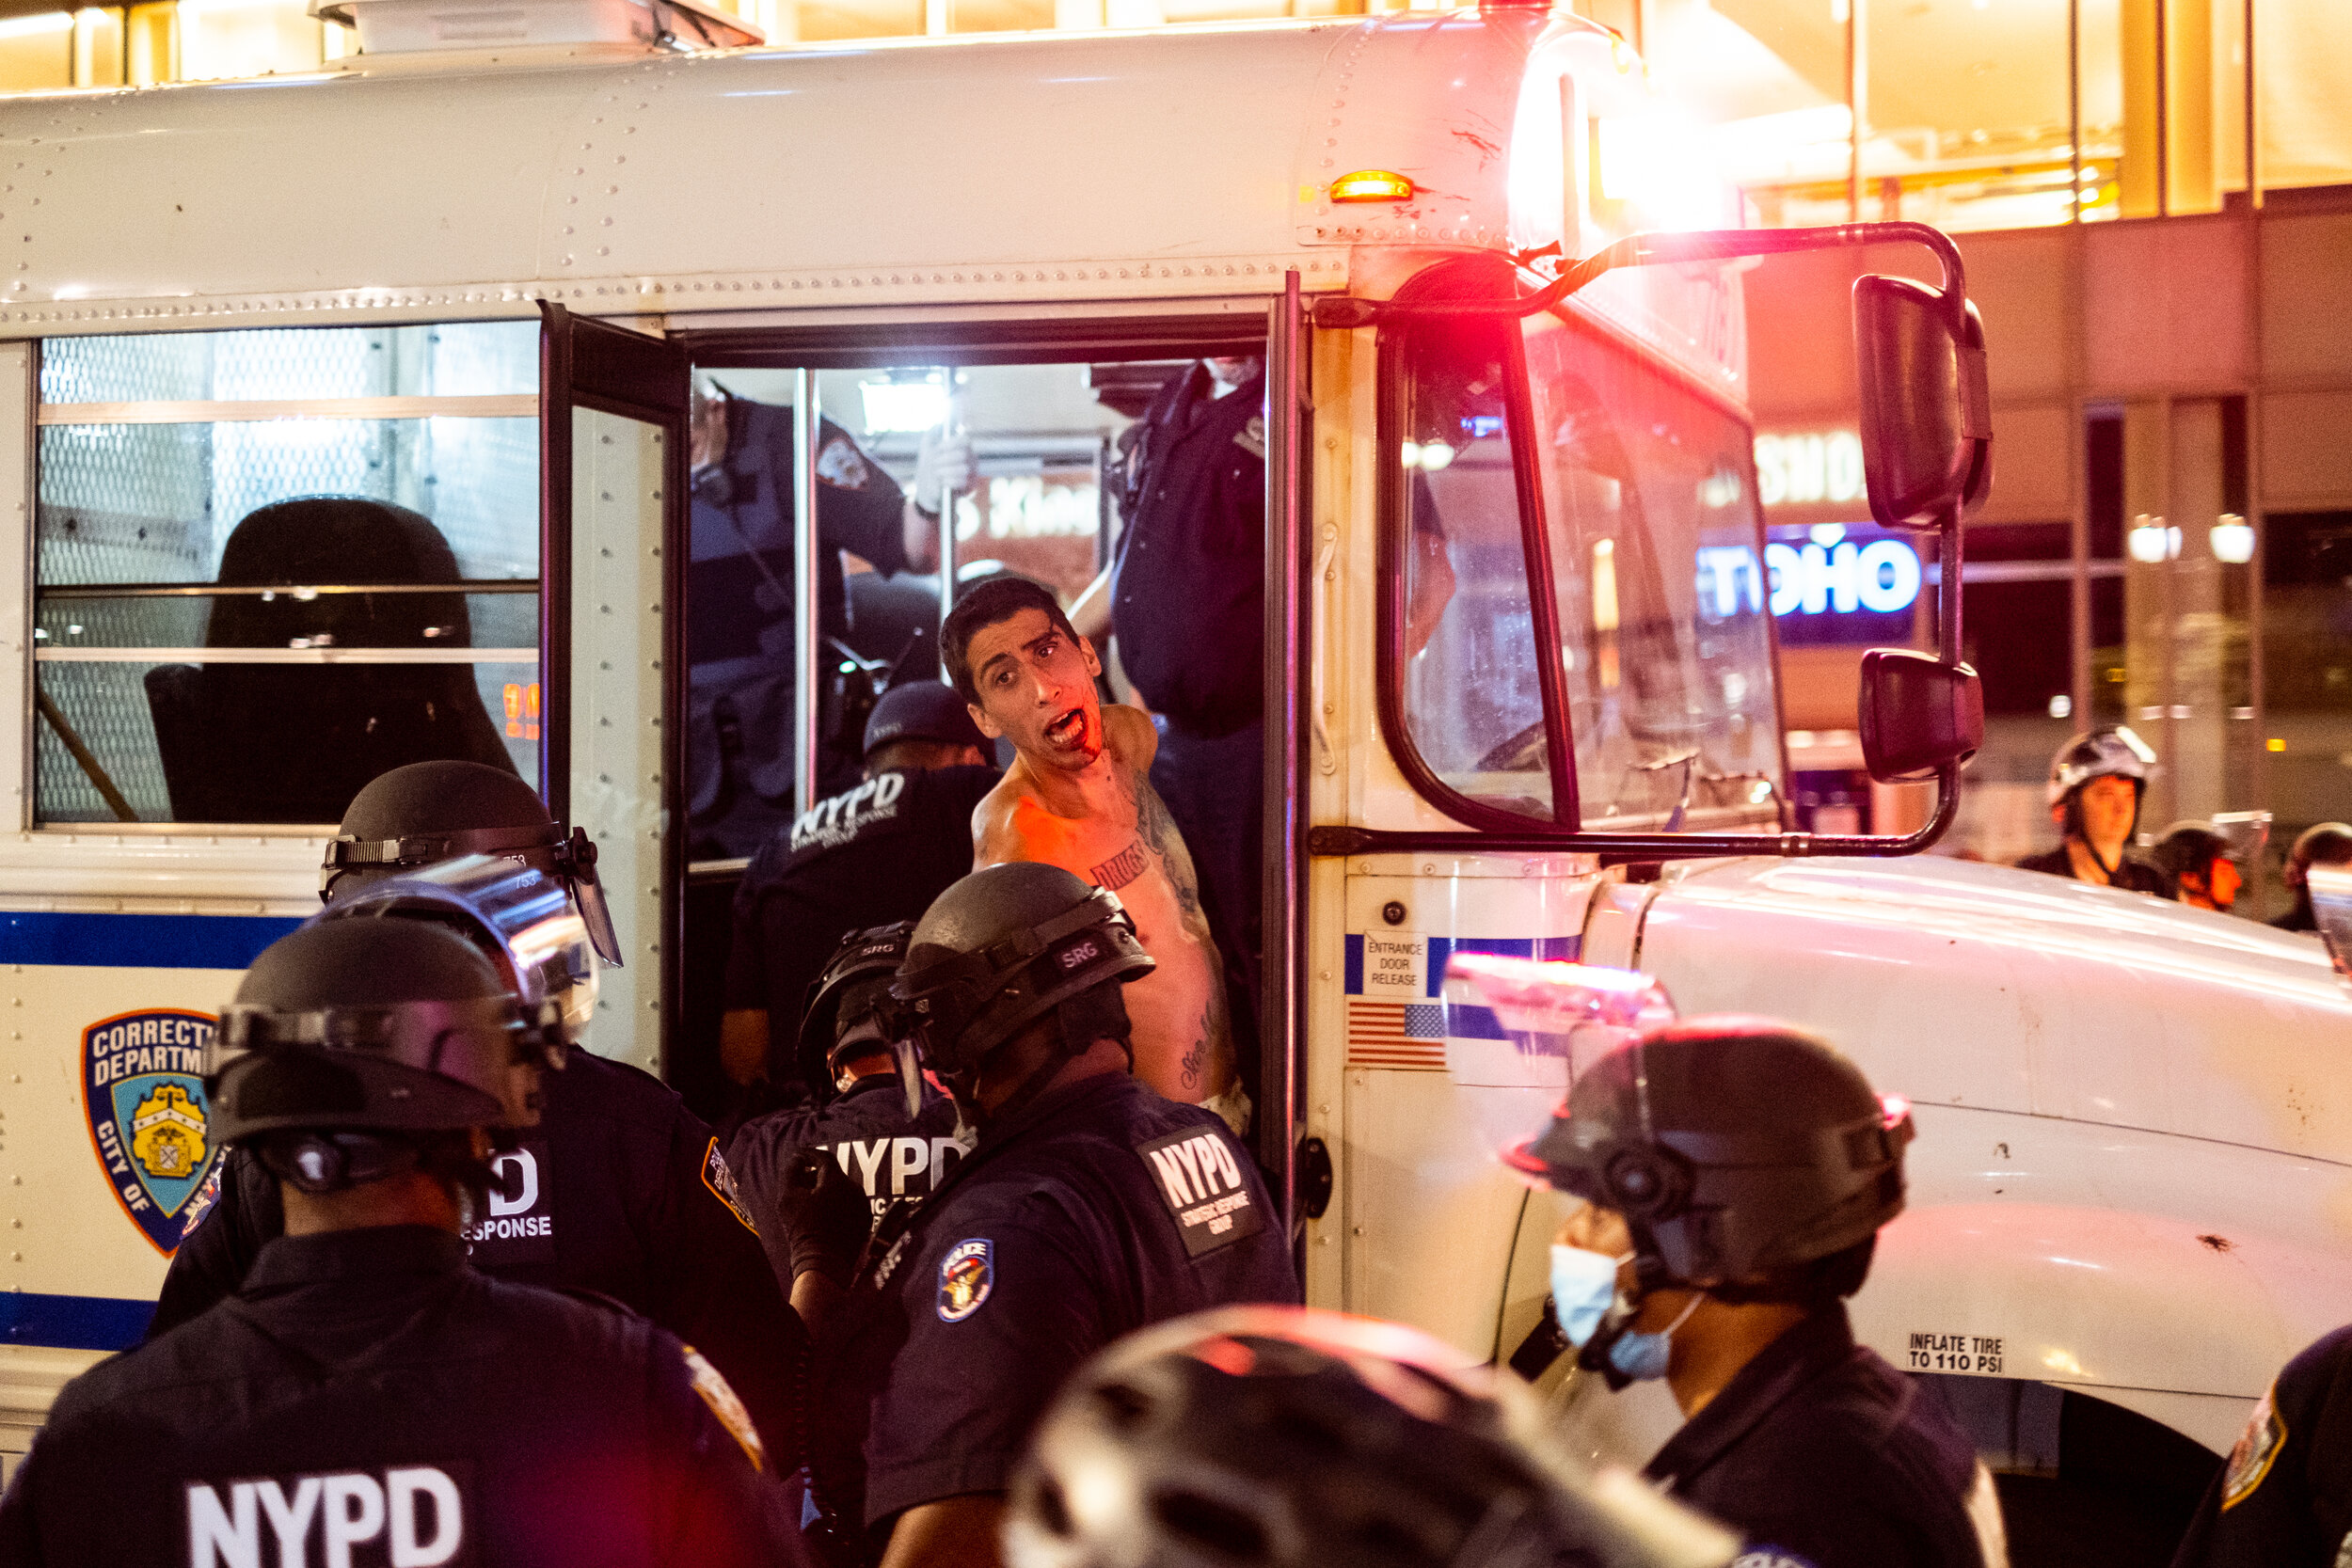  June 1, 2020: New York, NY -   A man is detained by police during widespread looting in midtown Manhattan after George Floyd was killed while being detained by Minneapolis police on May 25.  